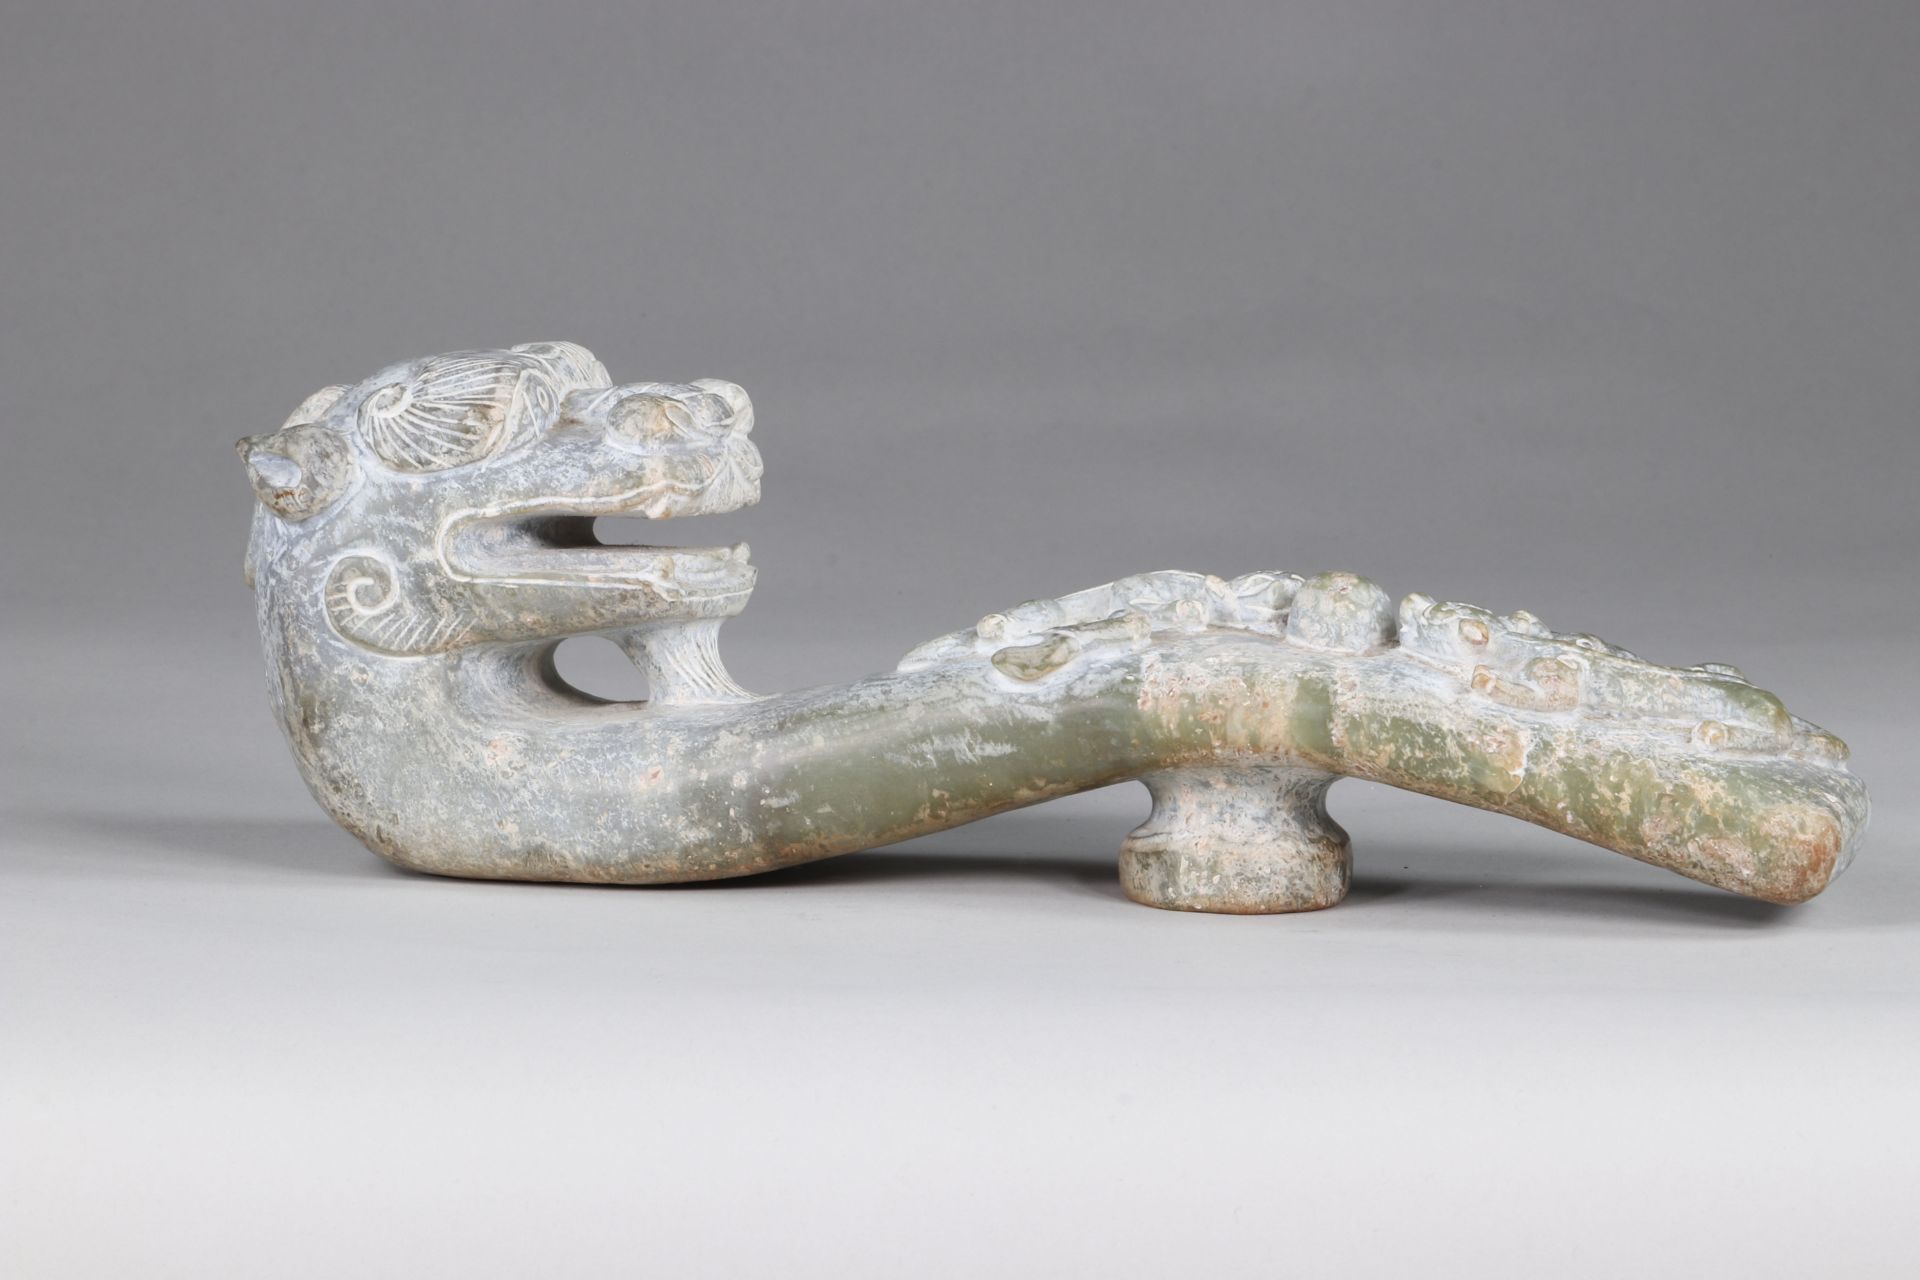 Ritual belt buckle in pale celadon jade, decorated with dragons - Archaic - characters indicating th - Image 5 of 7